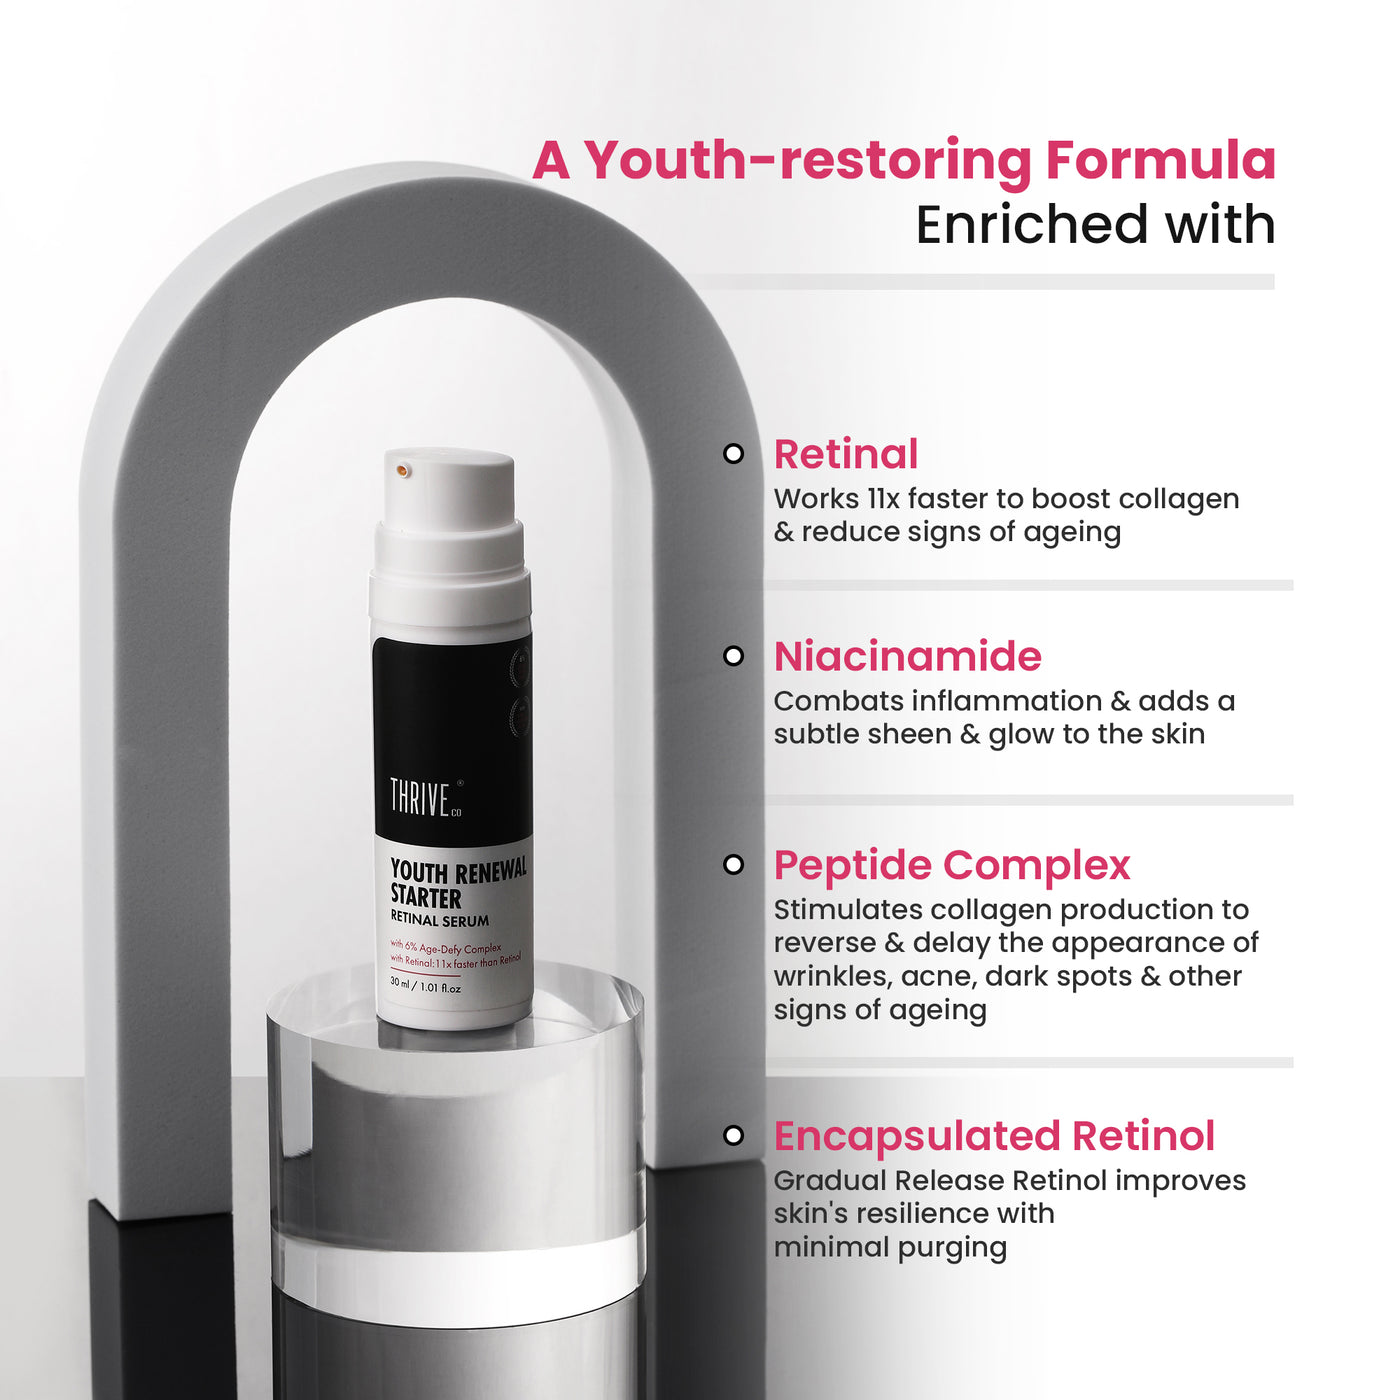 ThriveCo Youth Renewal Serum Starter | Anti-Ageing | Reduce Fine lines, Acne, Wrinkles | 30ml | Retinal serum: 11X Faster Than Your Retinol Serum | 6% Age Defy Complex | For Men & Women